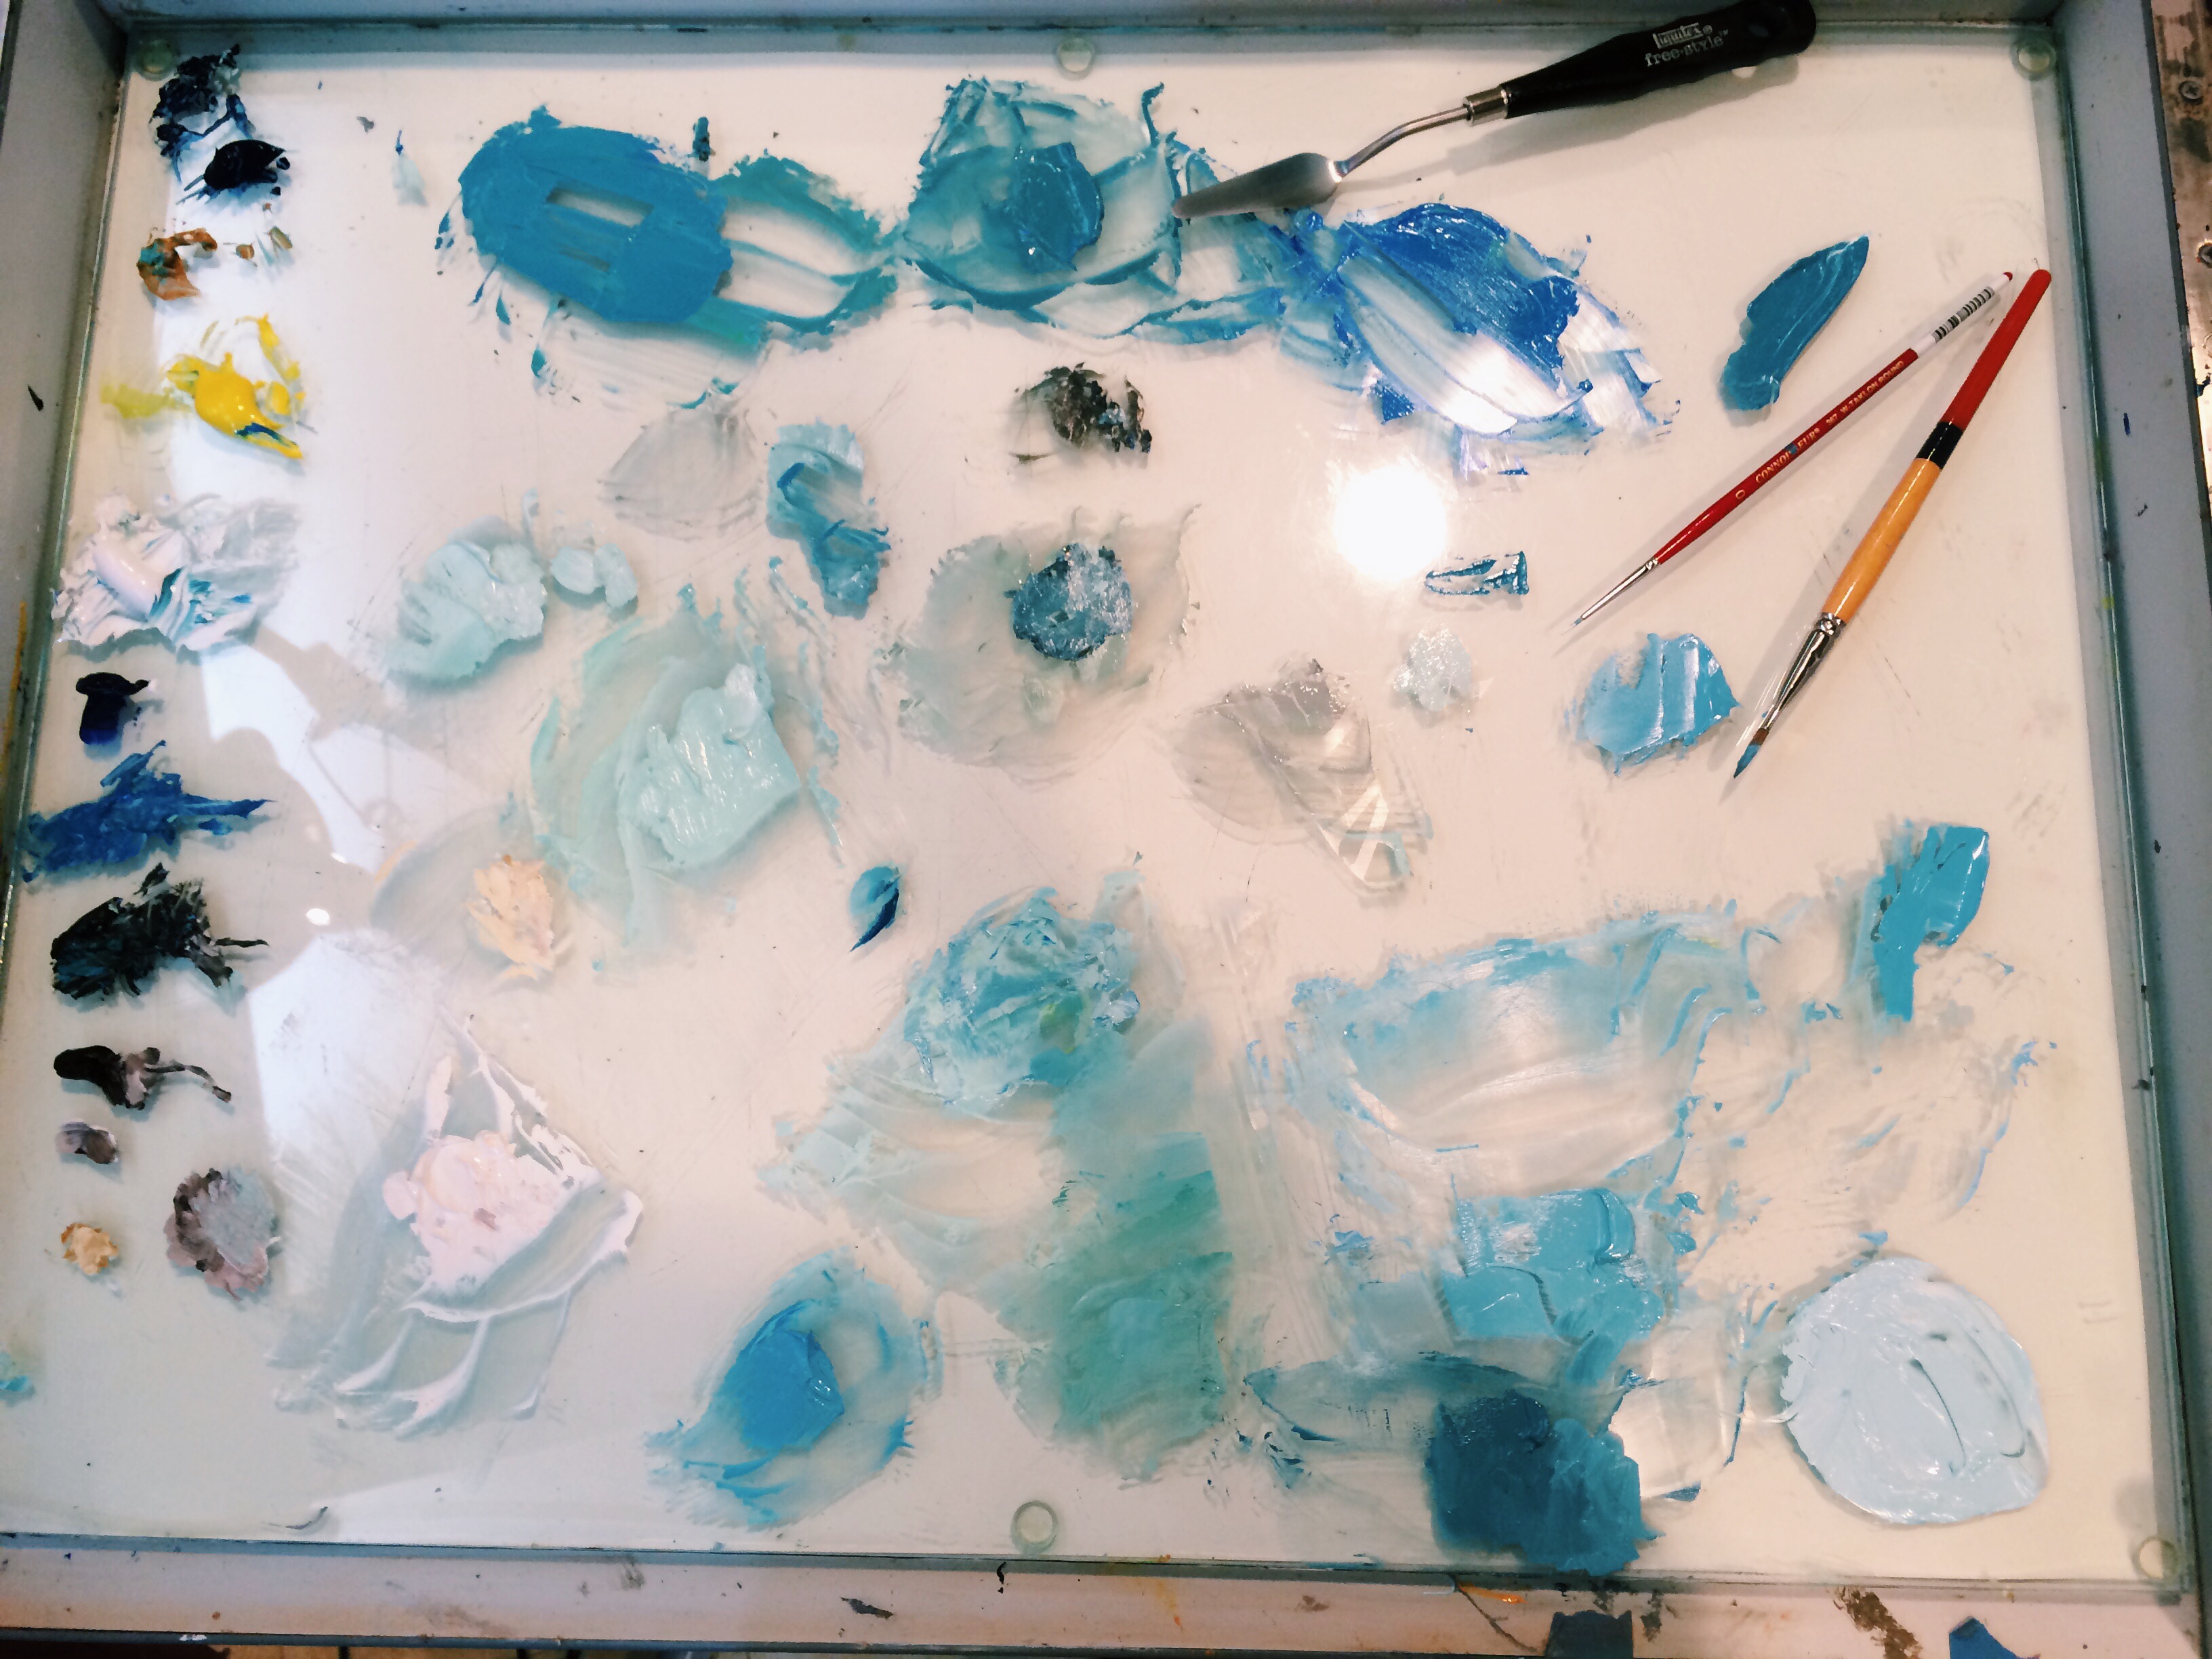 My palette: so many shades of blue and teal!